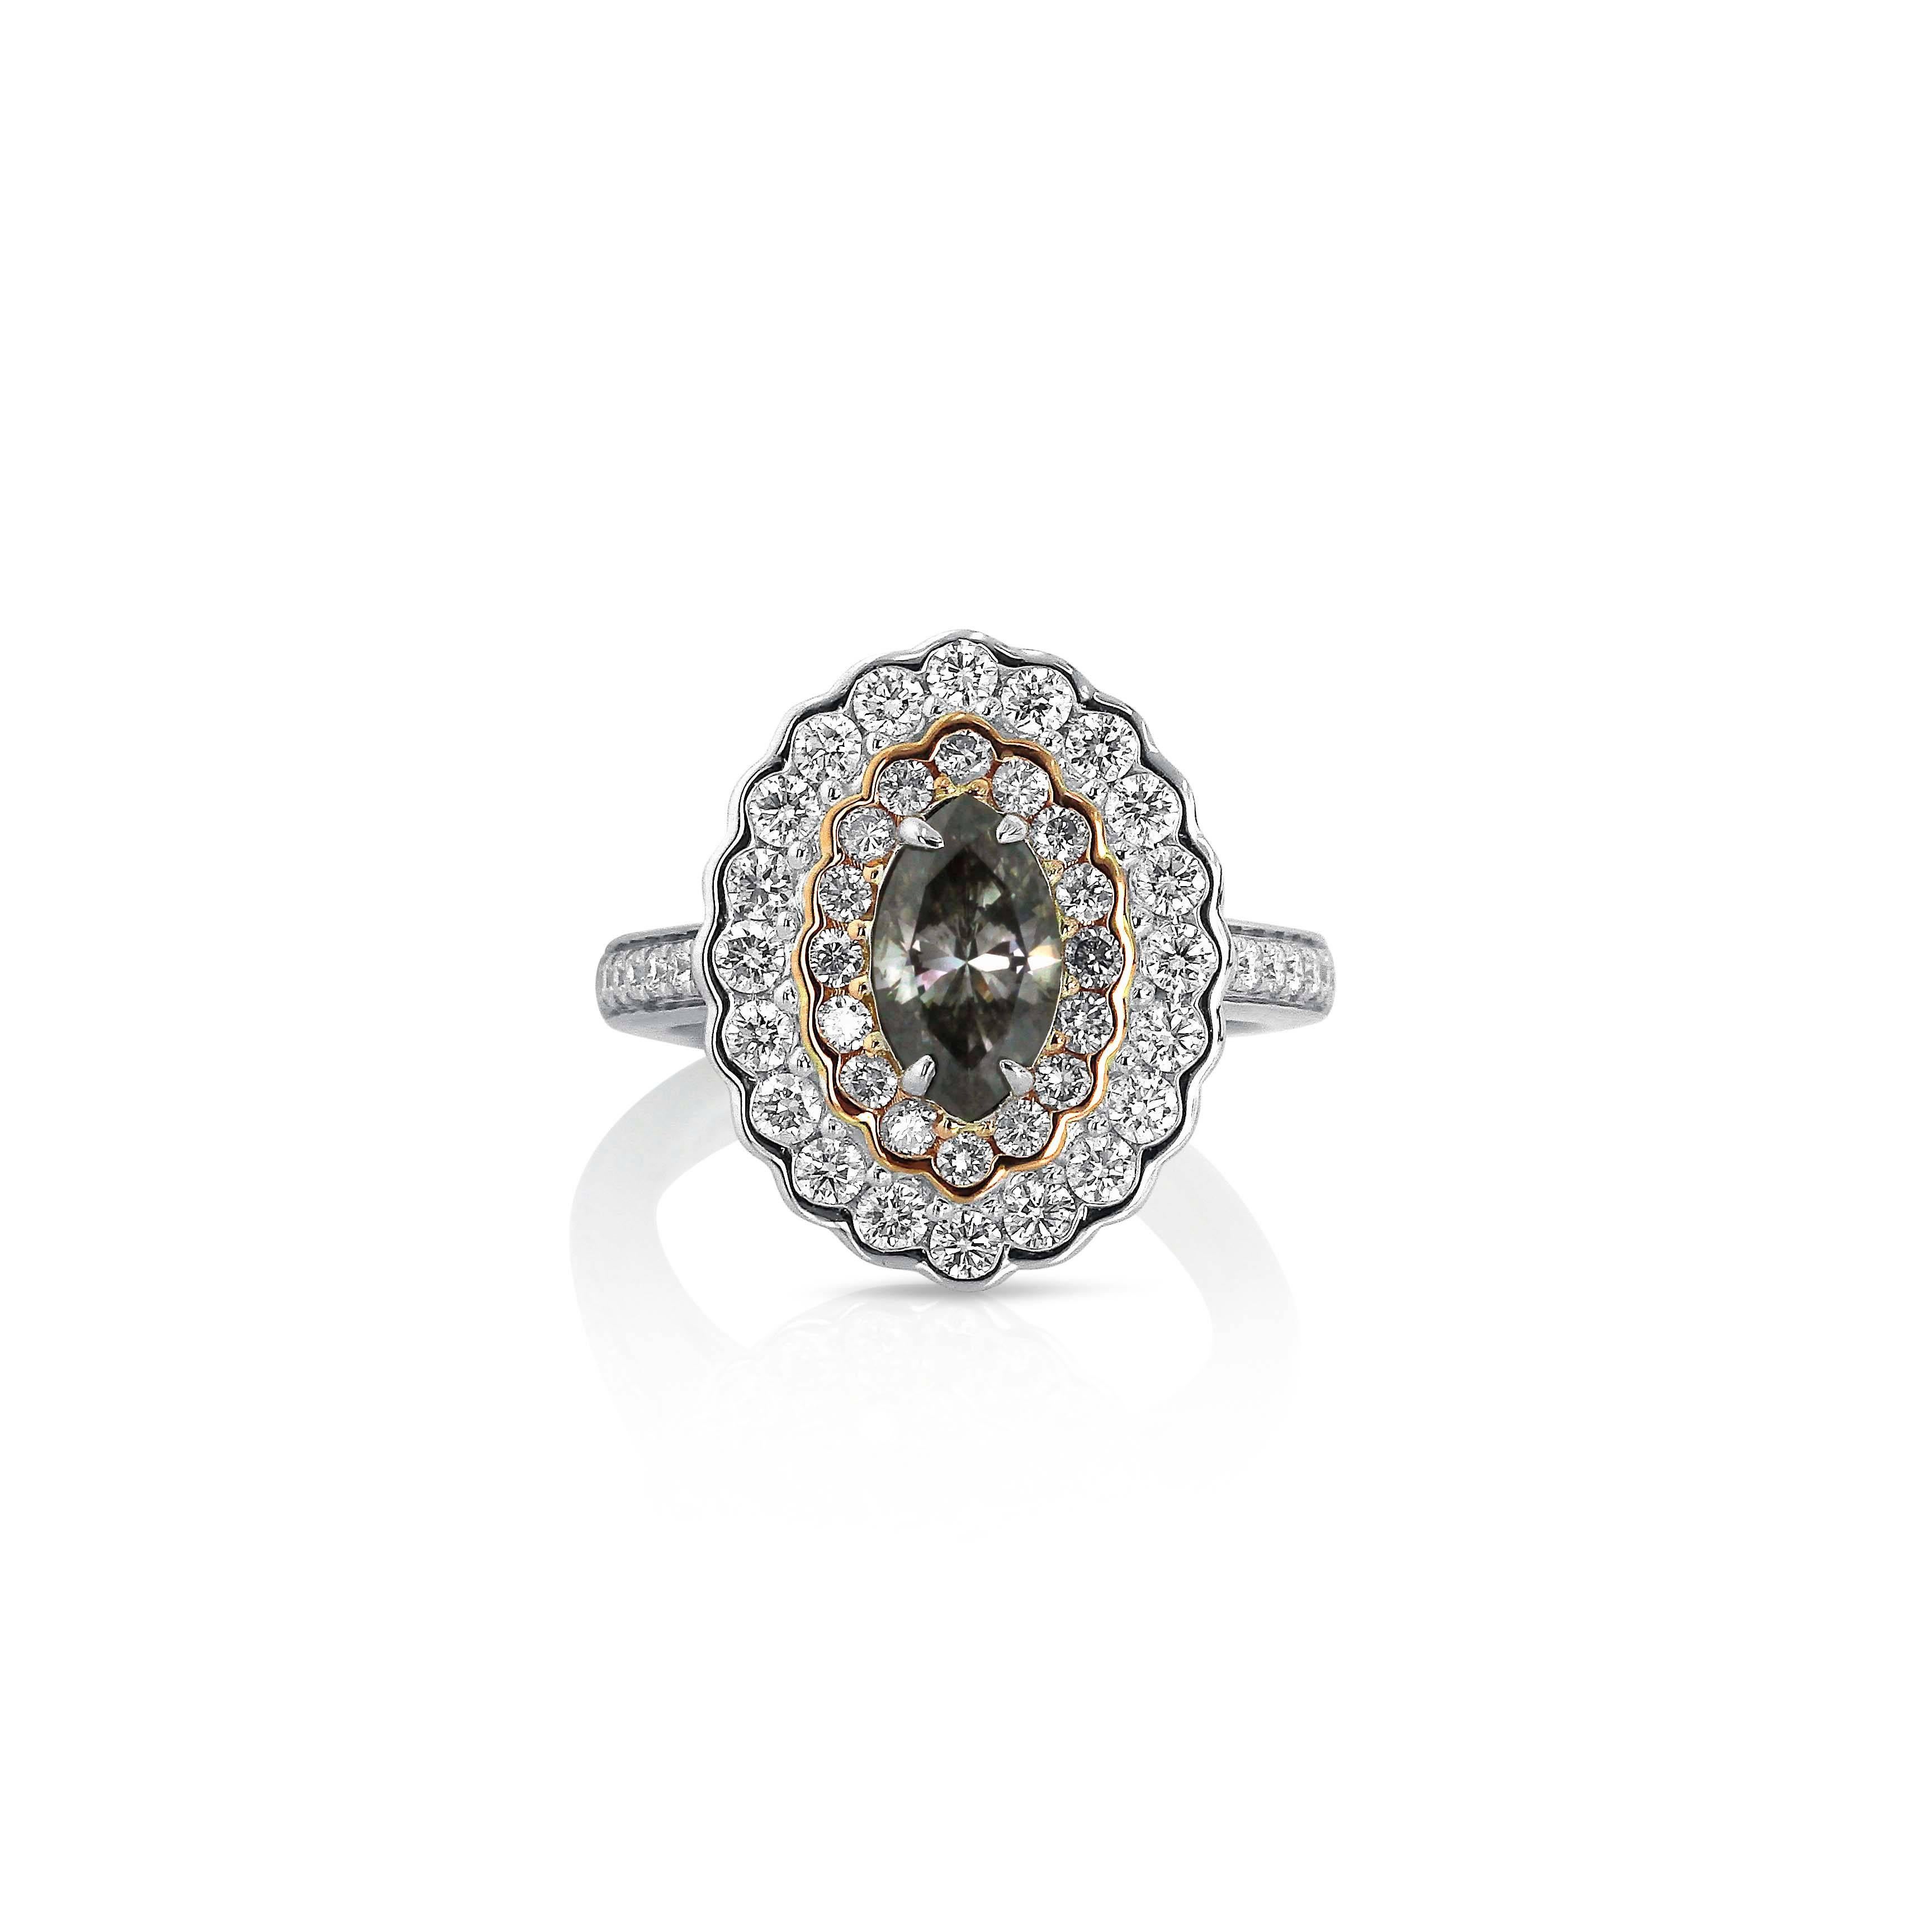 A rare gray diamond is framed by a modified double halo; the innermost halo is composed of pink diamonds and the outer halo is of white diamonds. A scalloped edge accentuates the roundness of the smaller diamonds while emphasising the long curve of